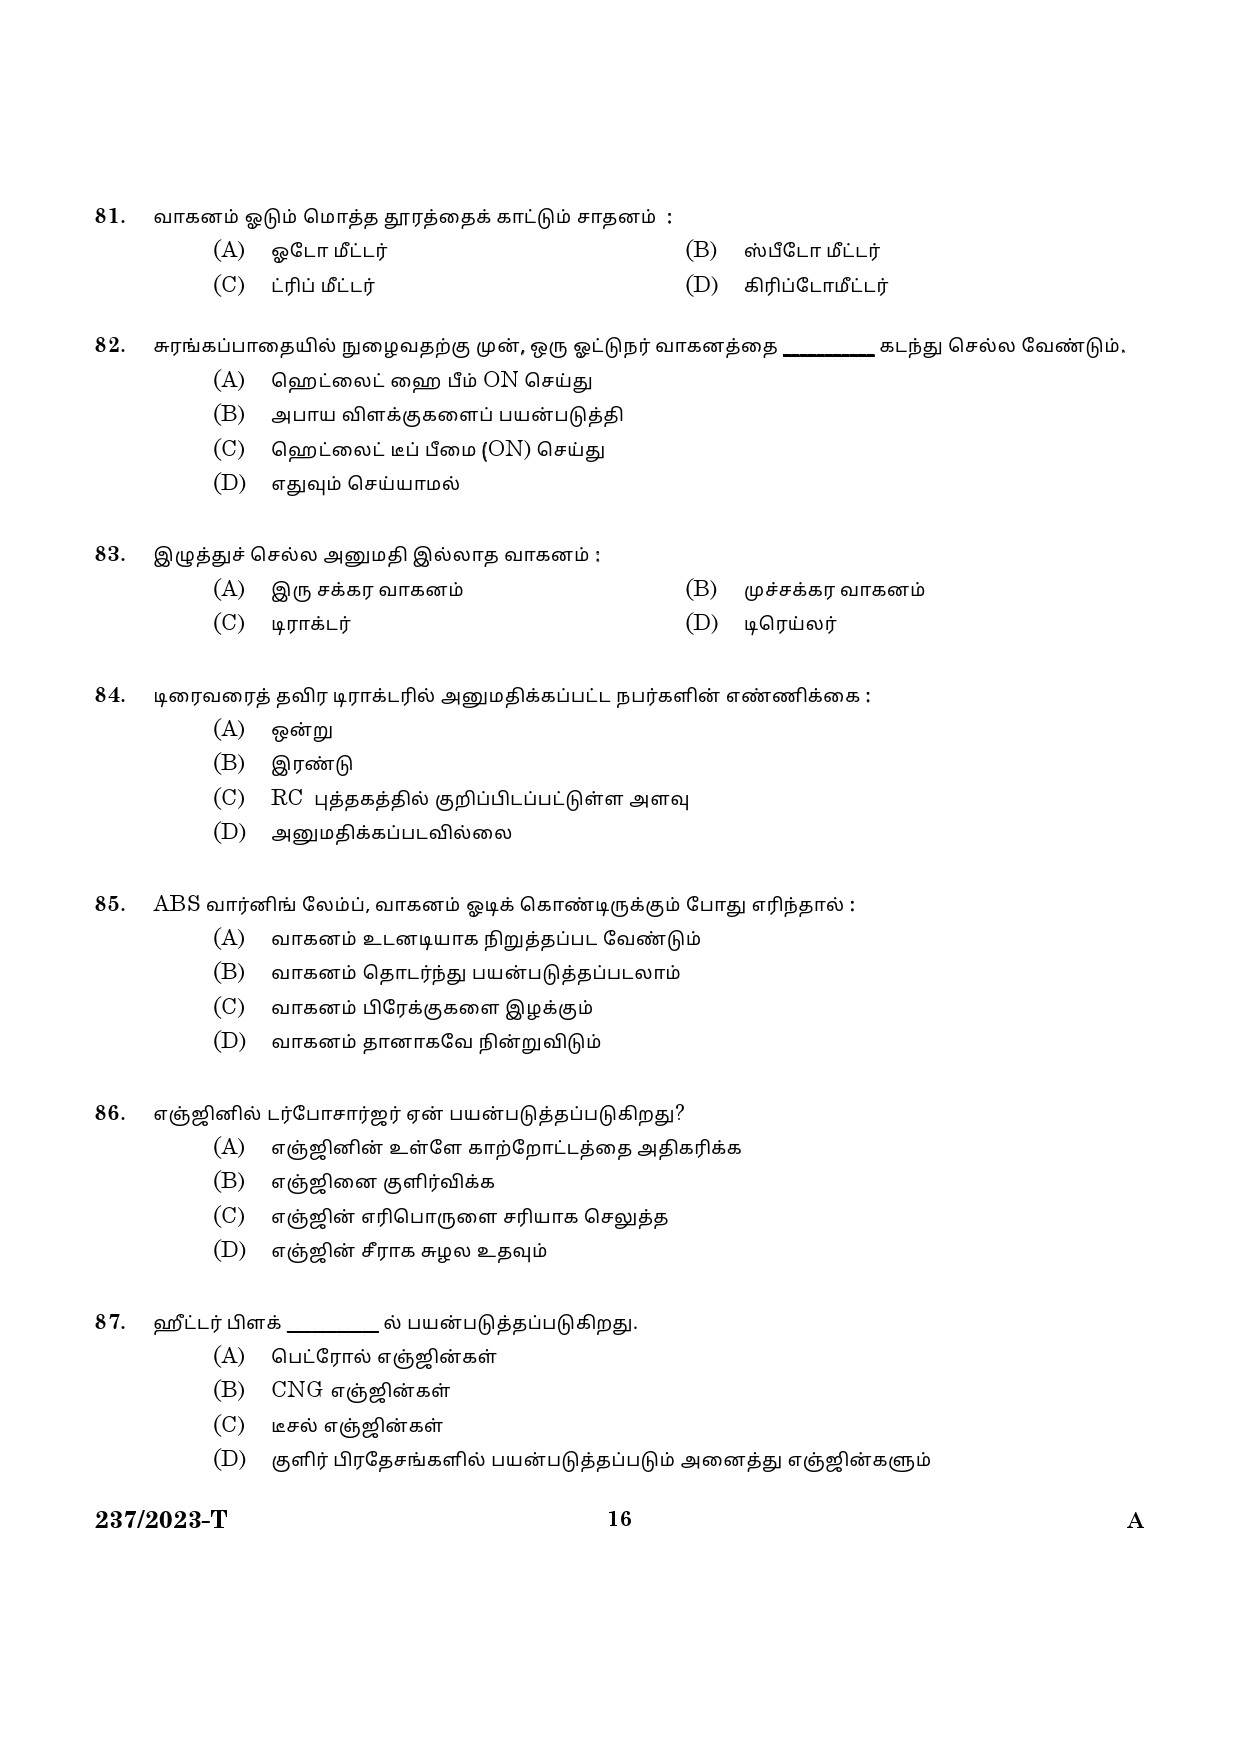 KPSC Forest Driver Tamil Exam 2023 Code 2372023 T 14